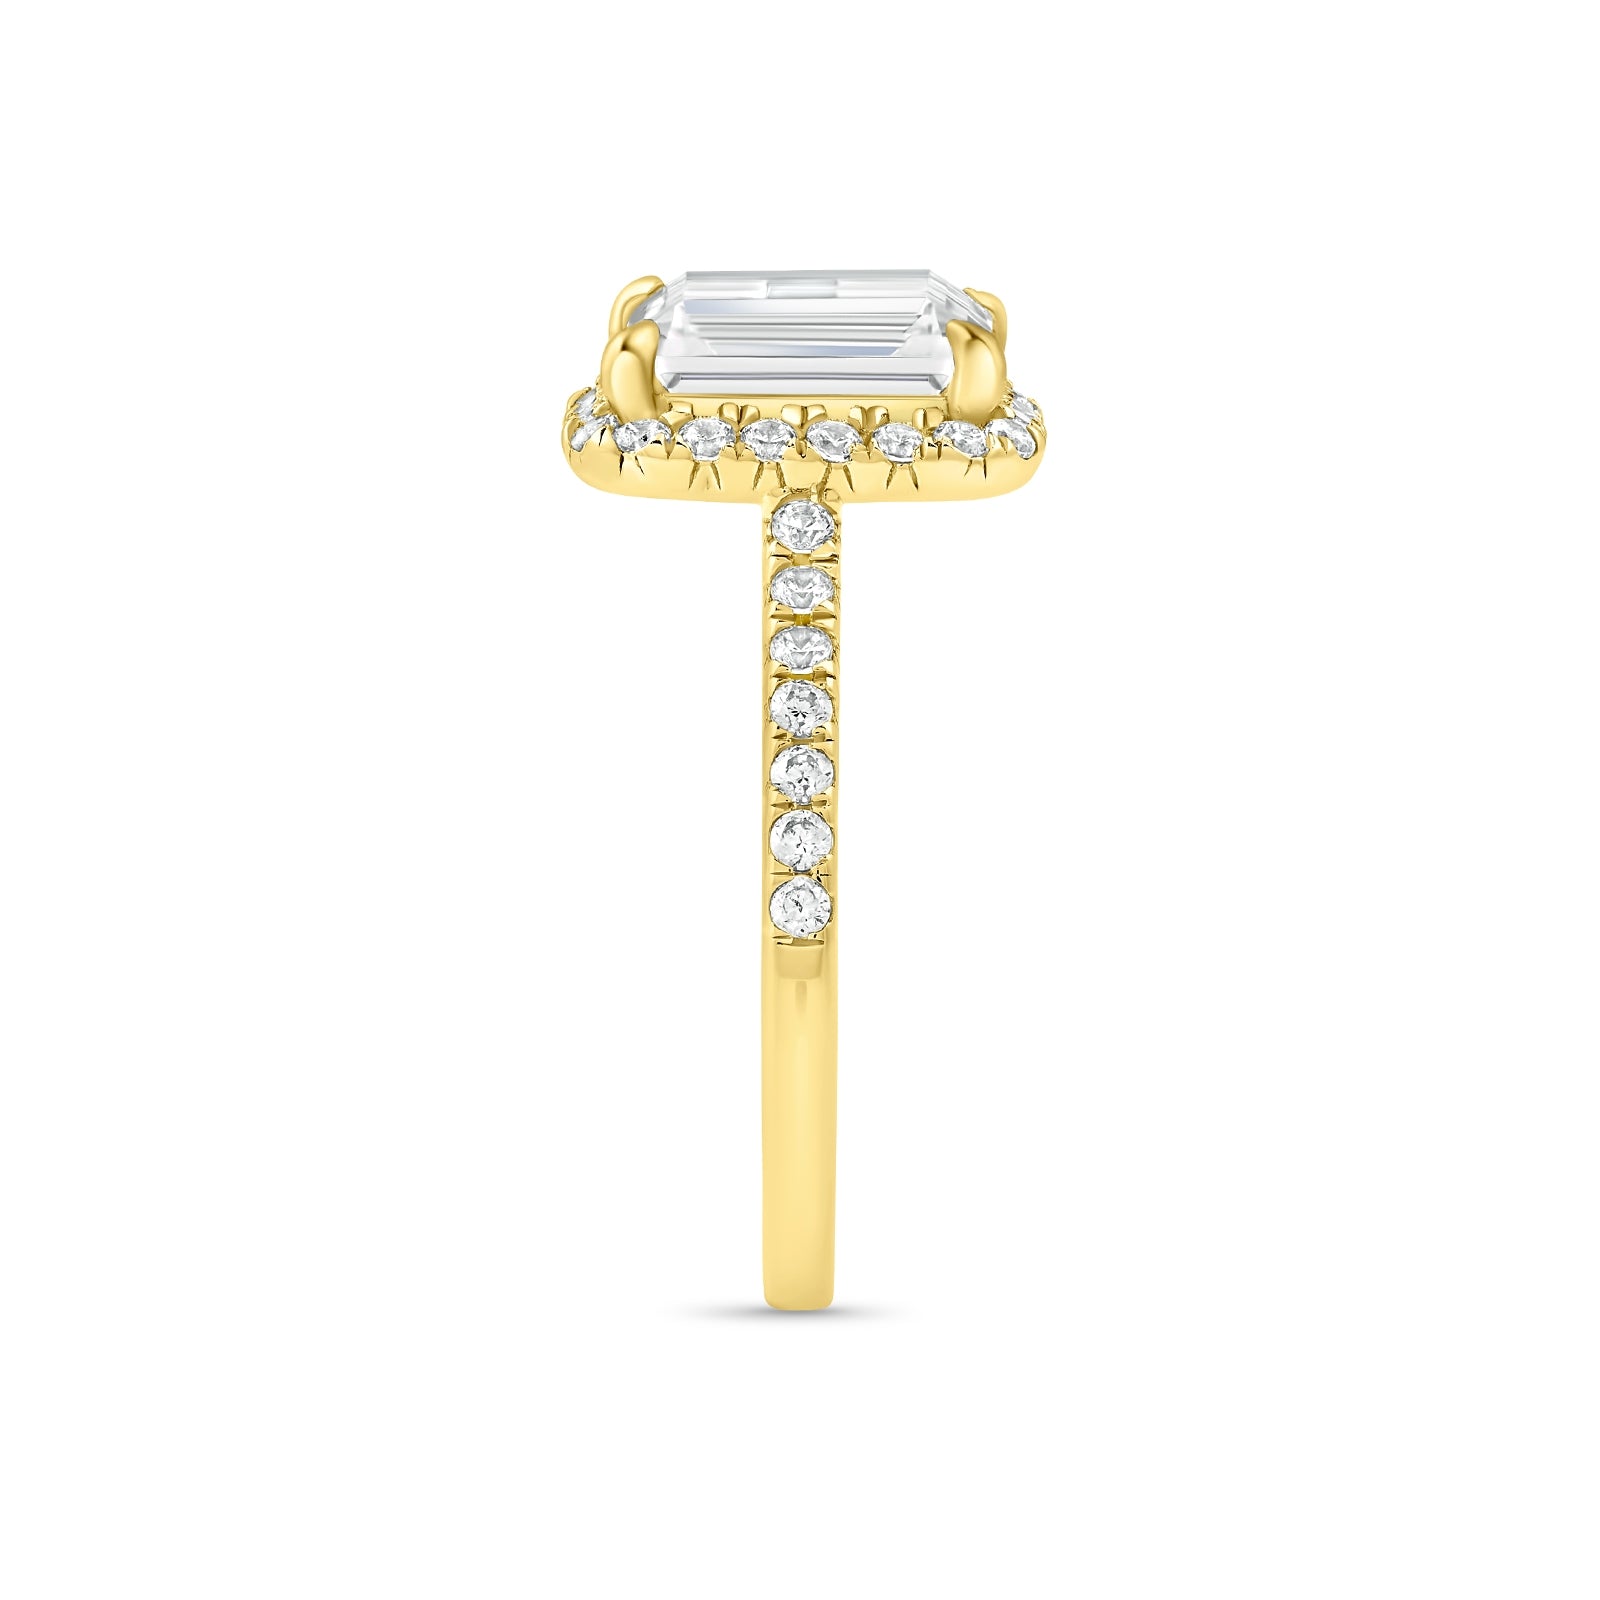 Side profile of gold emerald cut engagement ring with half eternity band detailing 